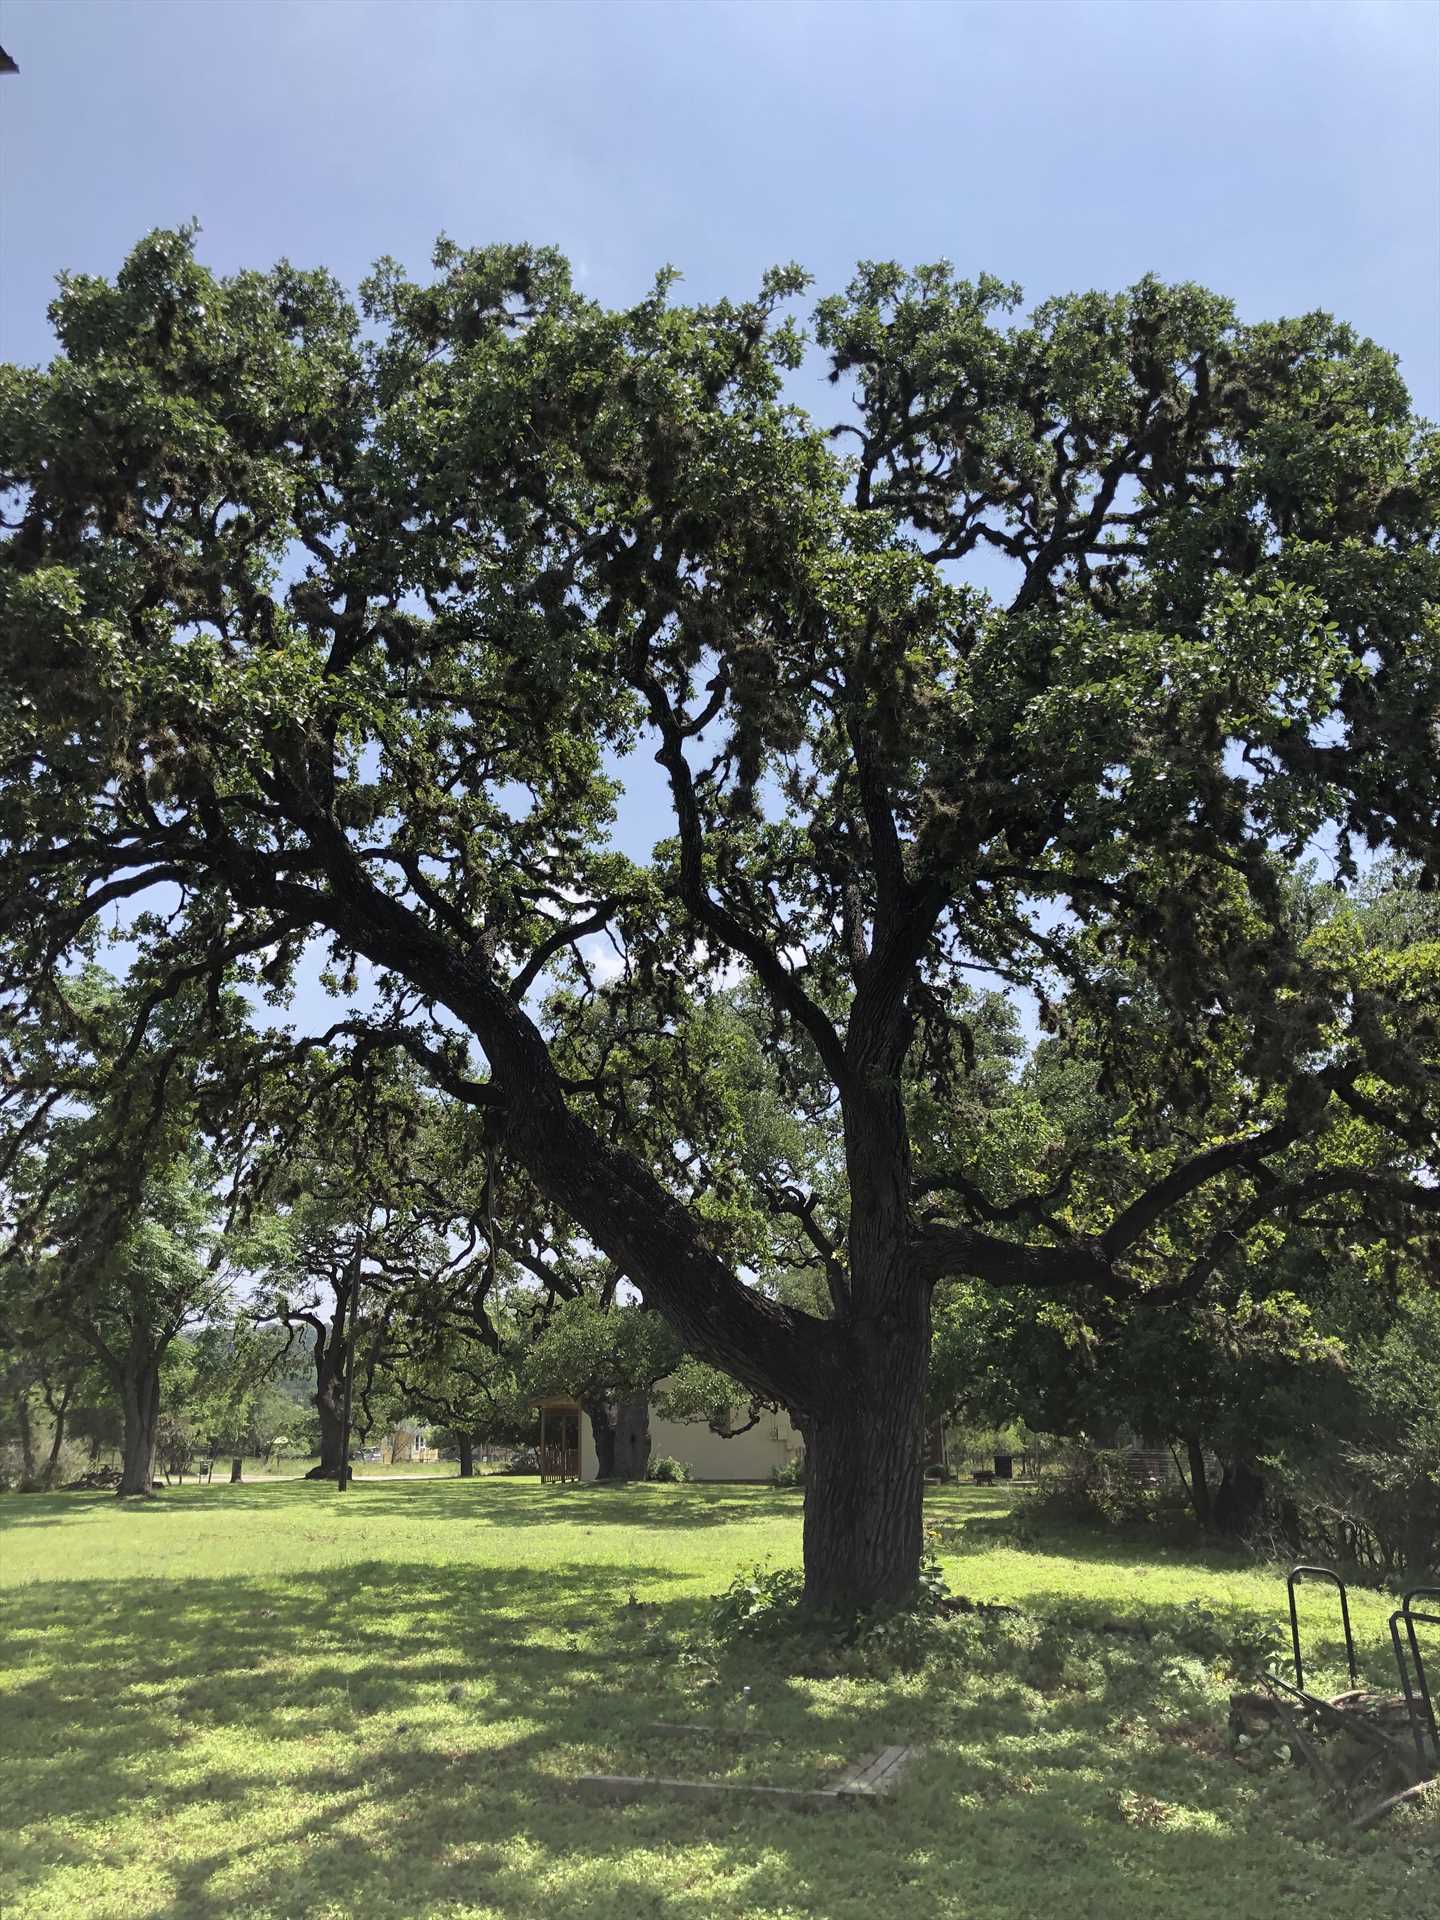                                                 Plenty of oaks and other trees cover the property here. They provide the perfect setting in which you can unwind.